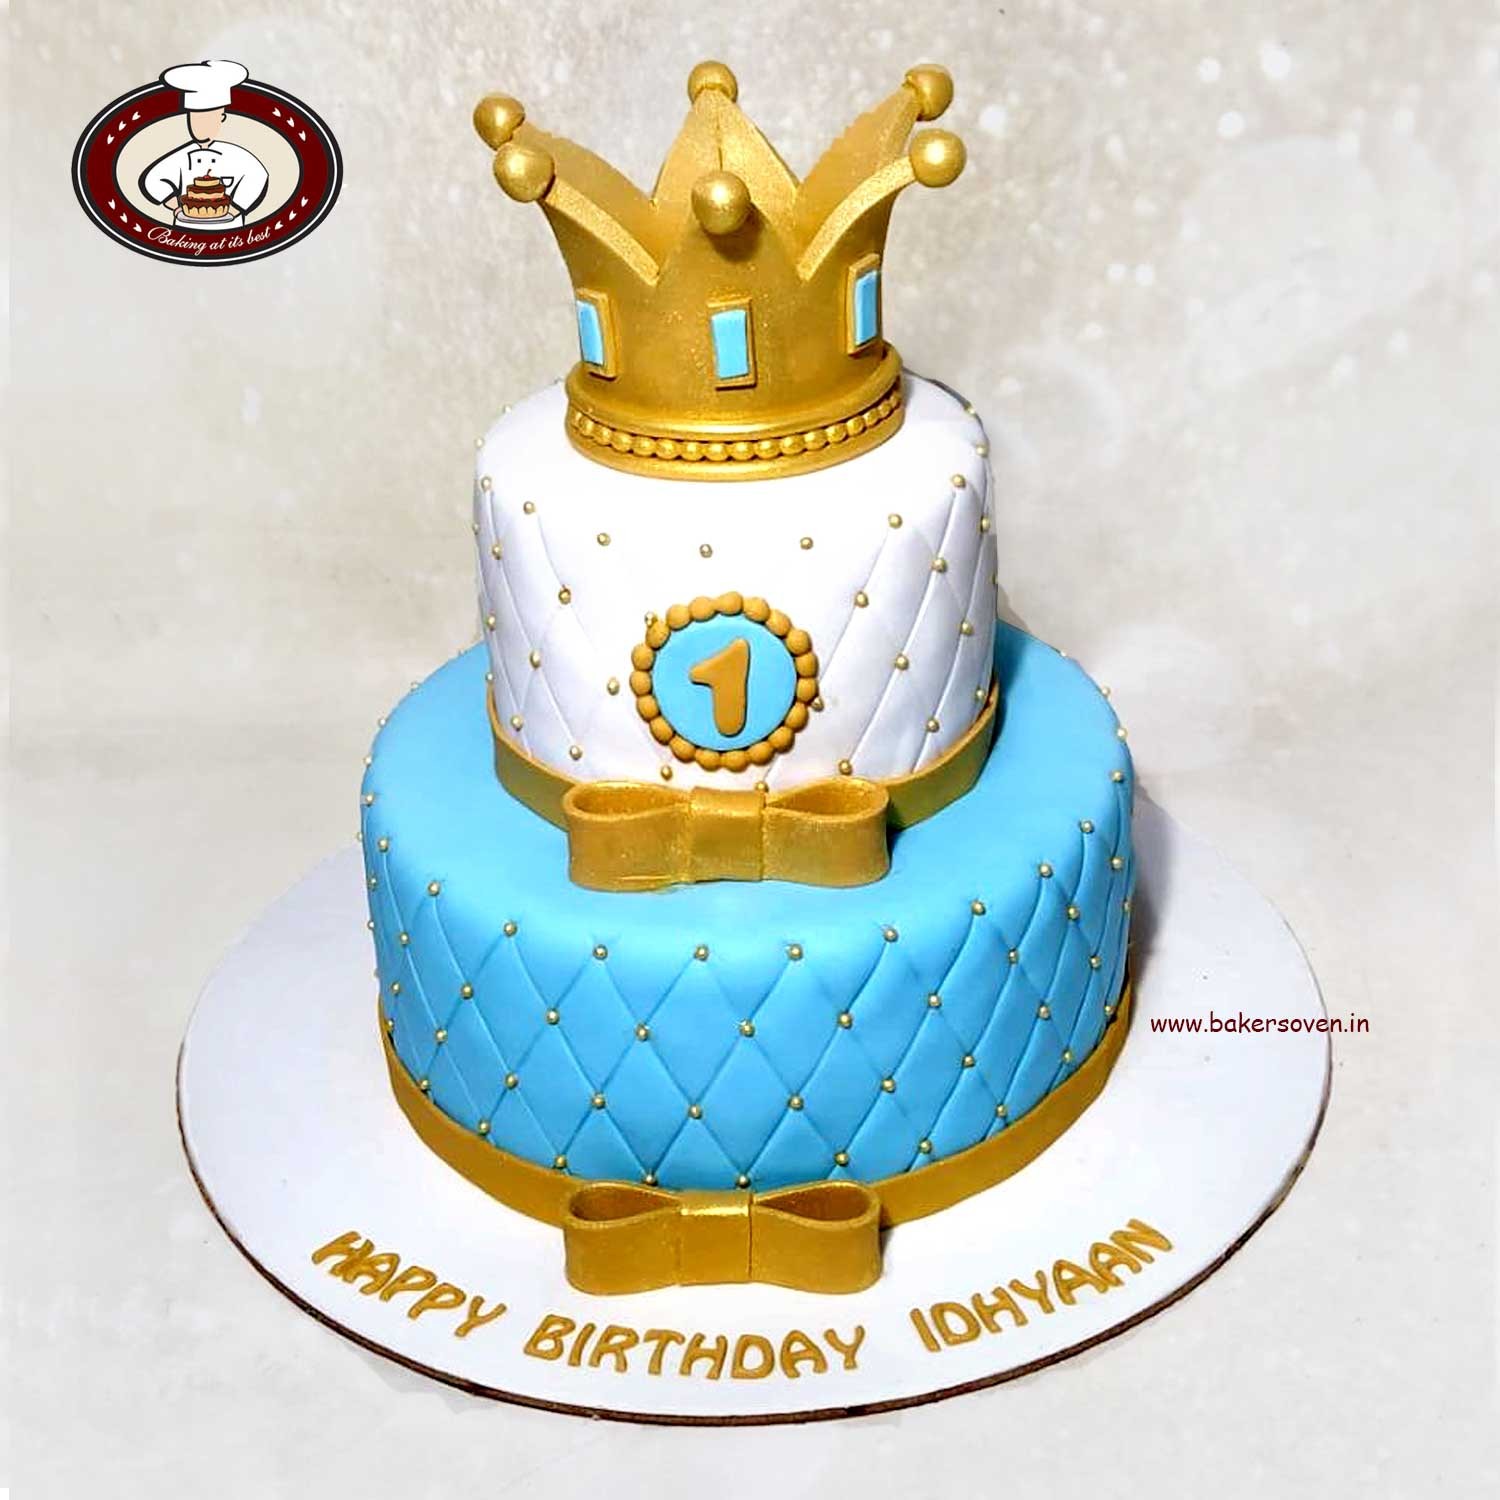 Golden Crown Crowns Cake, A Customize Crowns cake